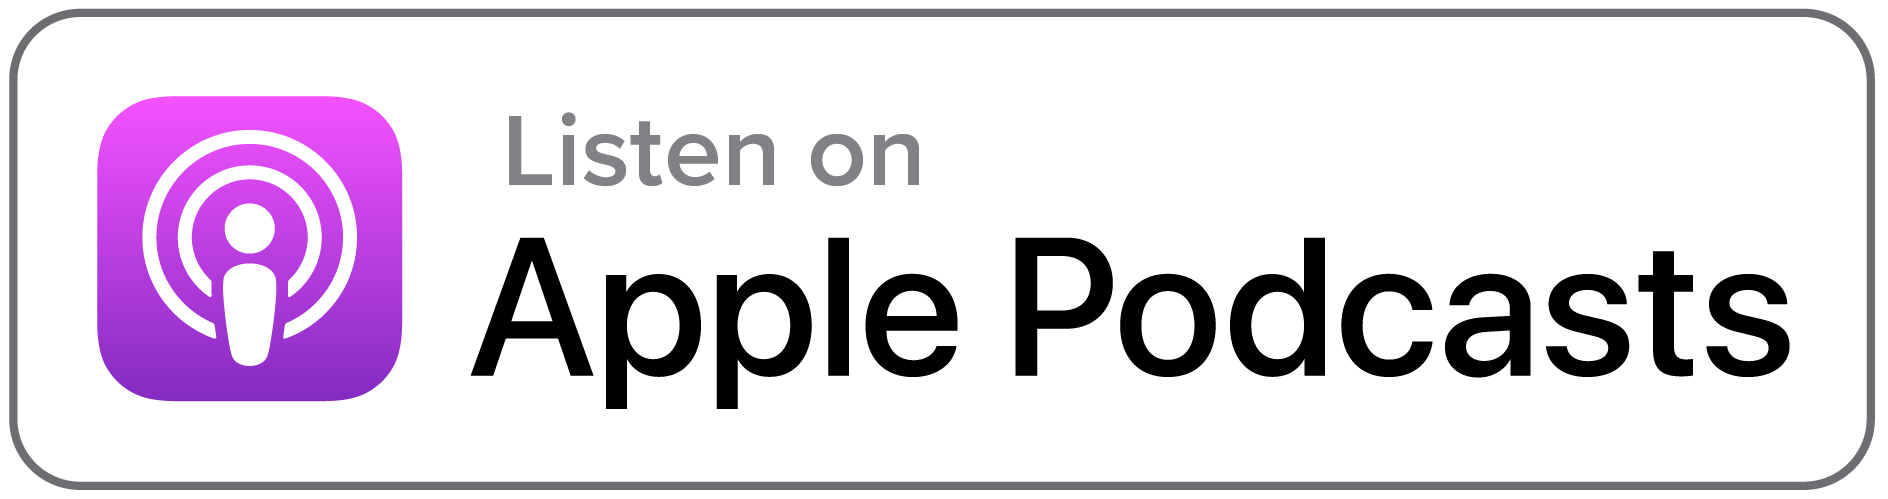 apple-podcasts-badge